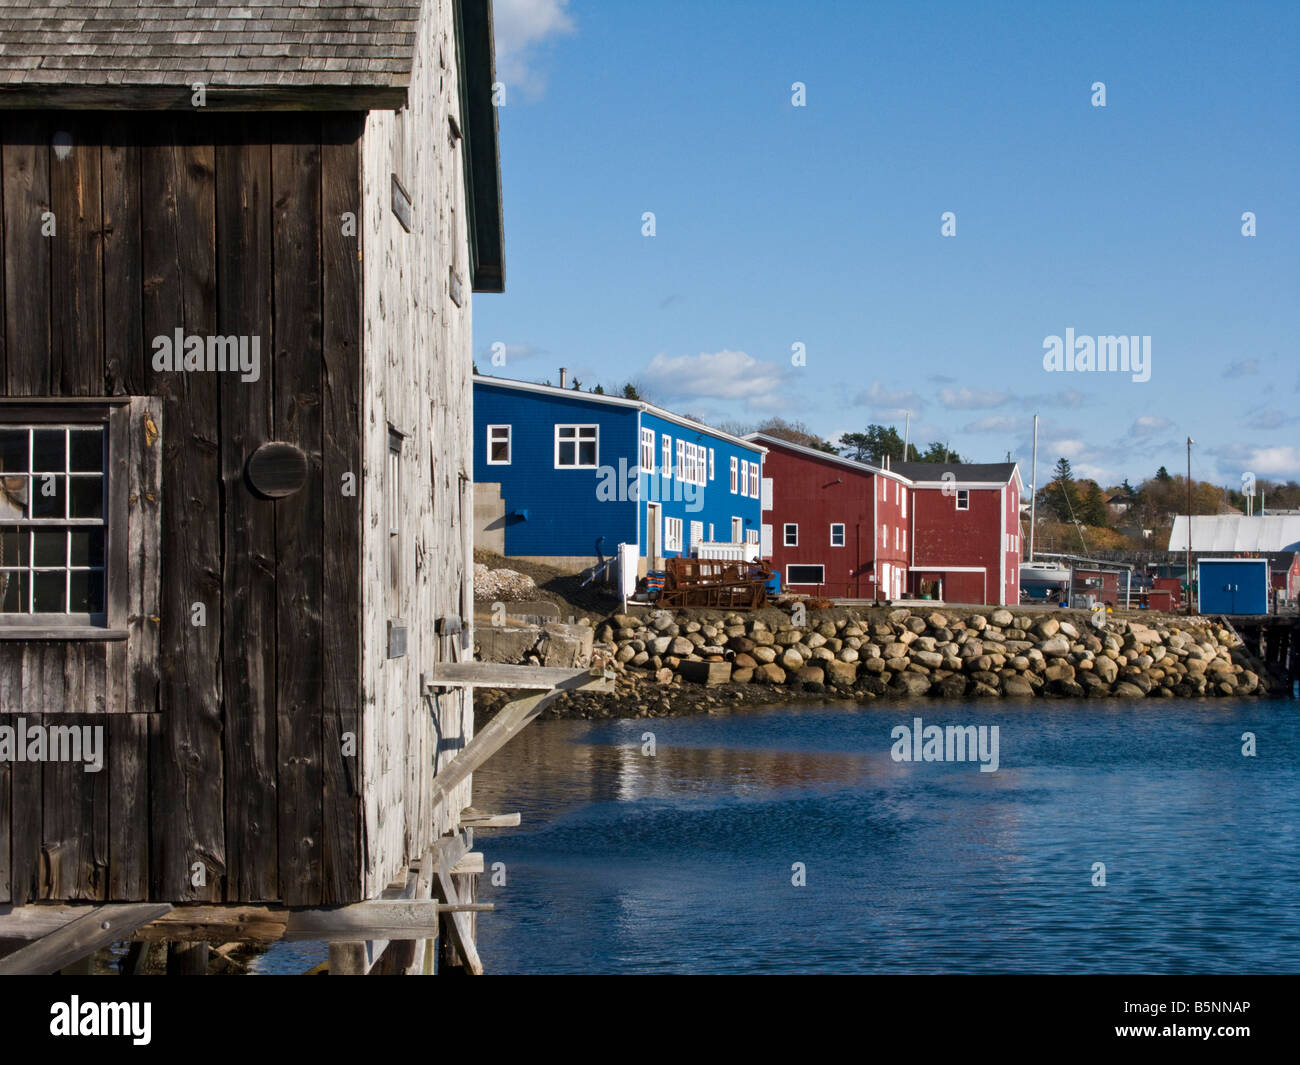 Fishing shack the dory shop with red and blue buildings in the harbour at Lunenburg Nova Scotia Stock Photo